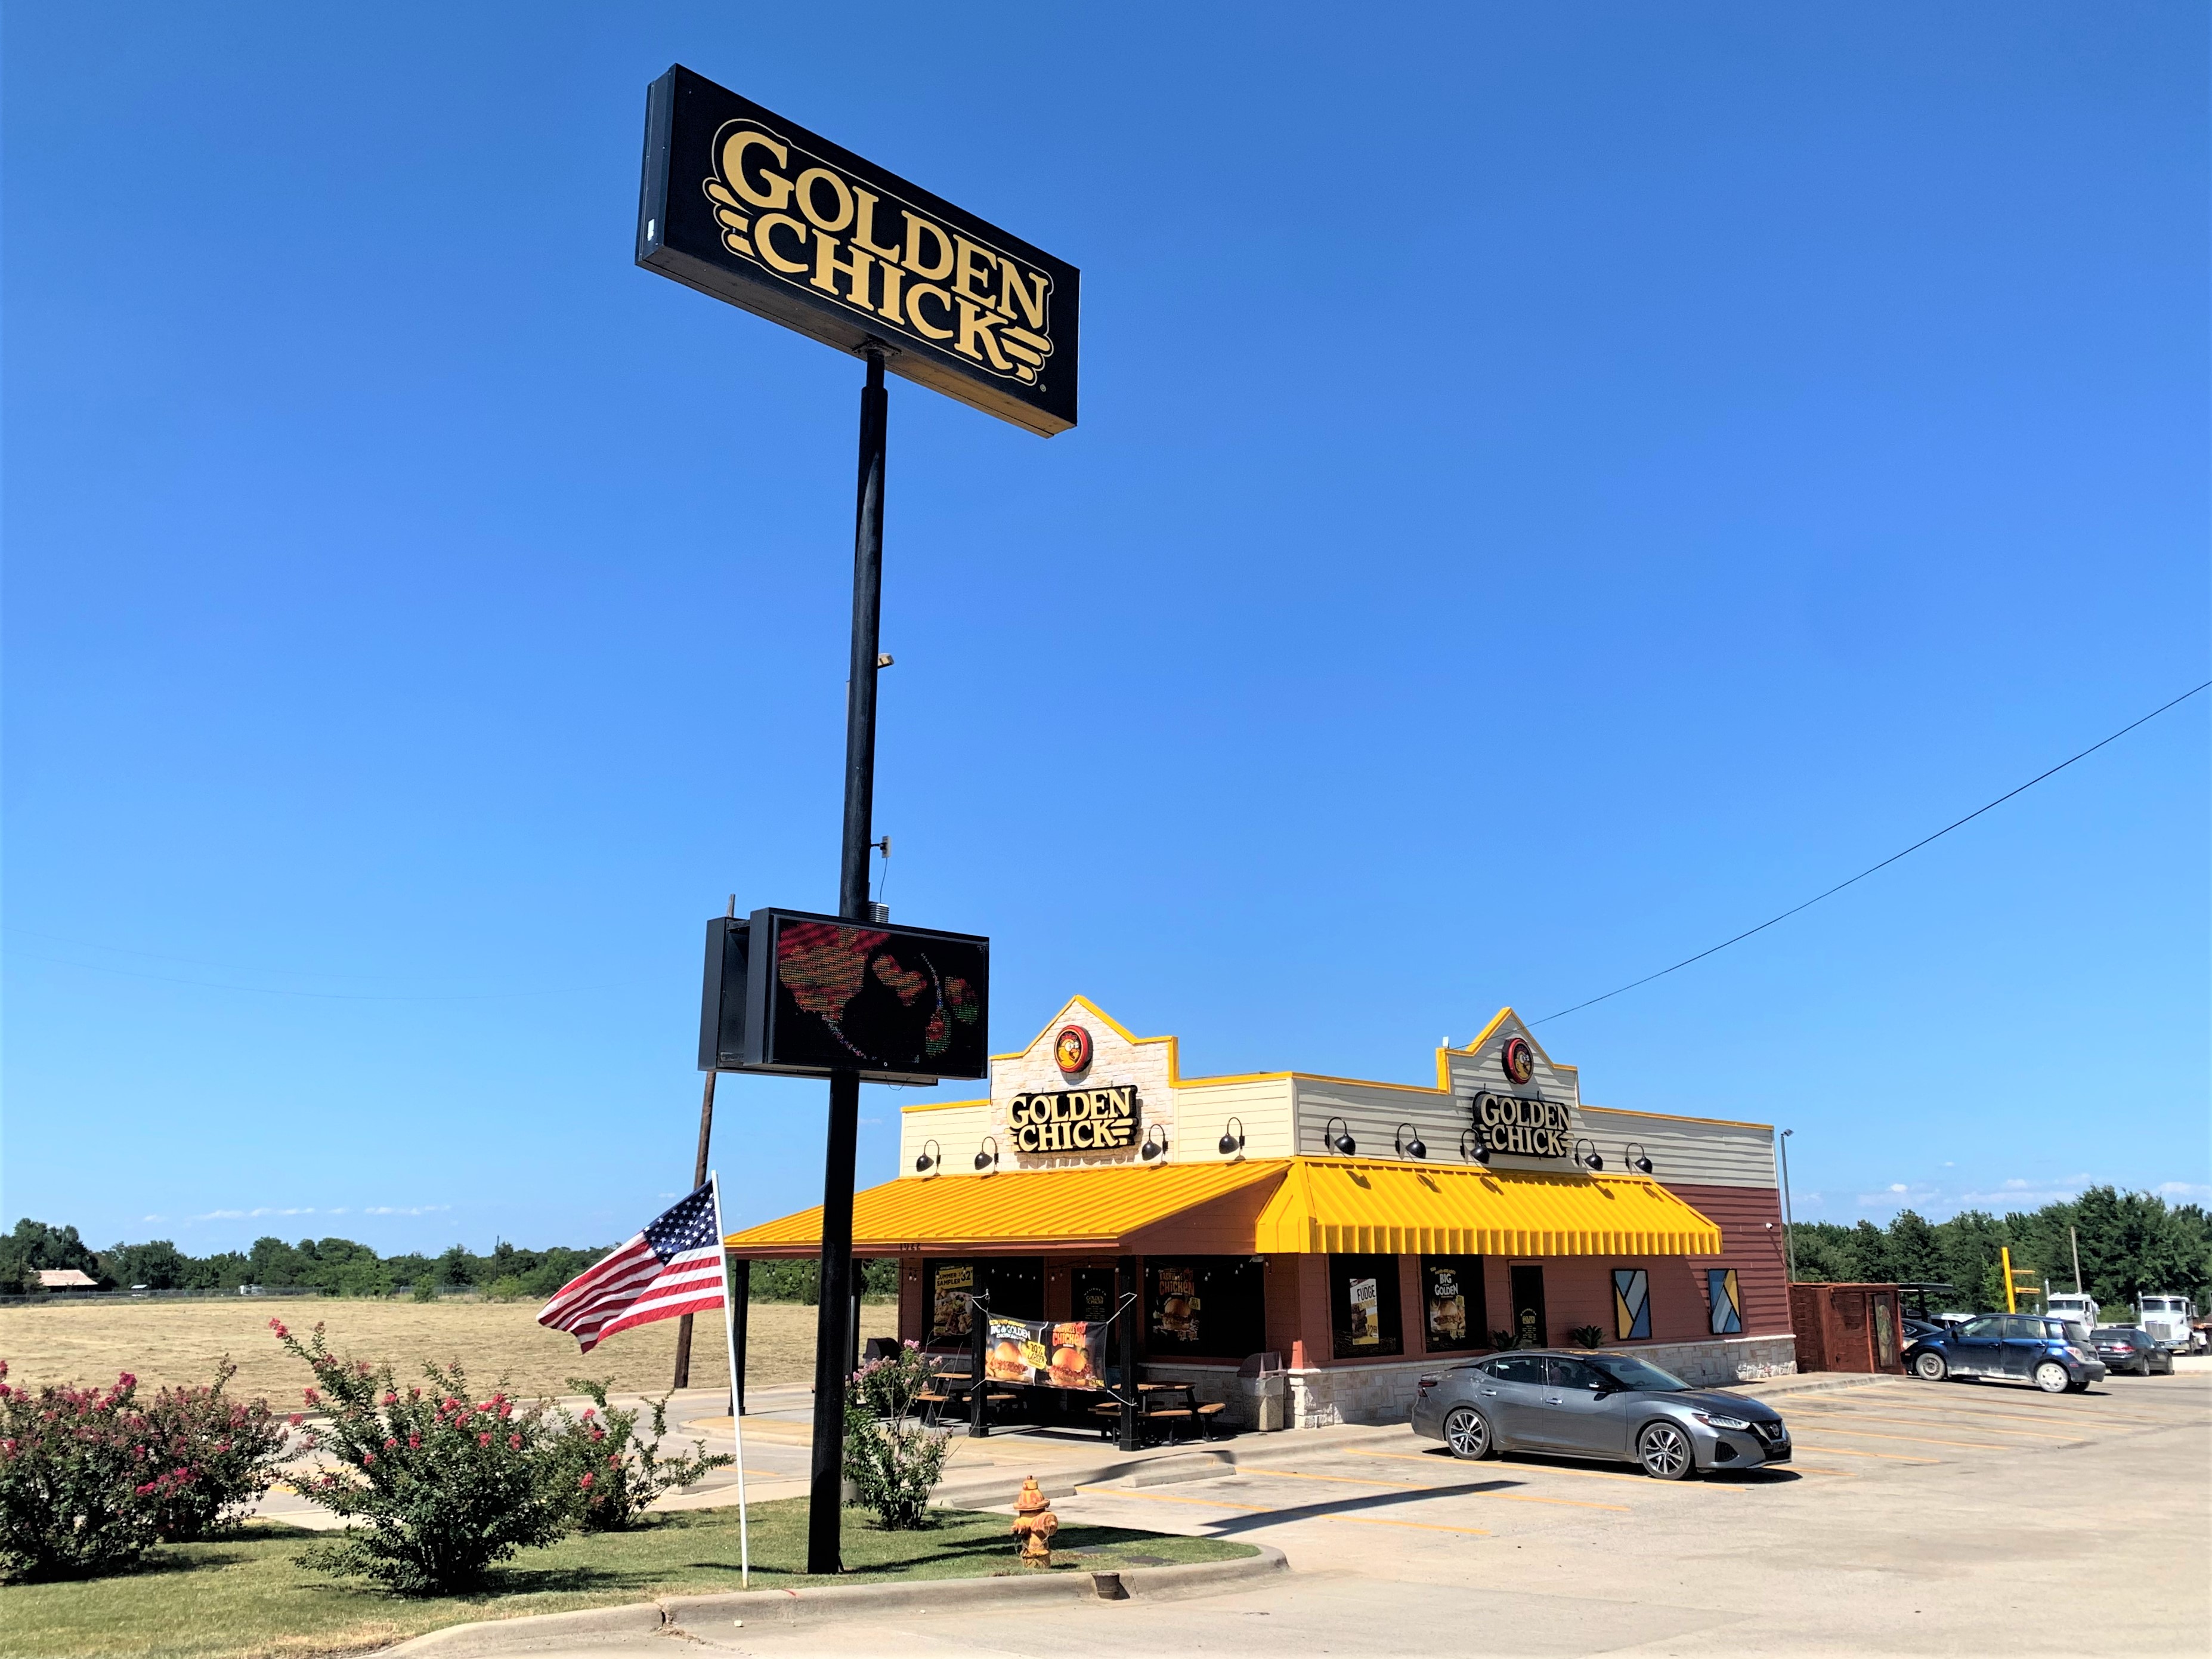 Golden Chick storefront.  Your local Golden Chick fast food restaurant in Whitesboro, Texas